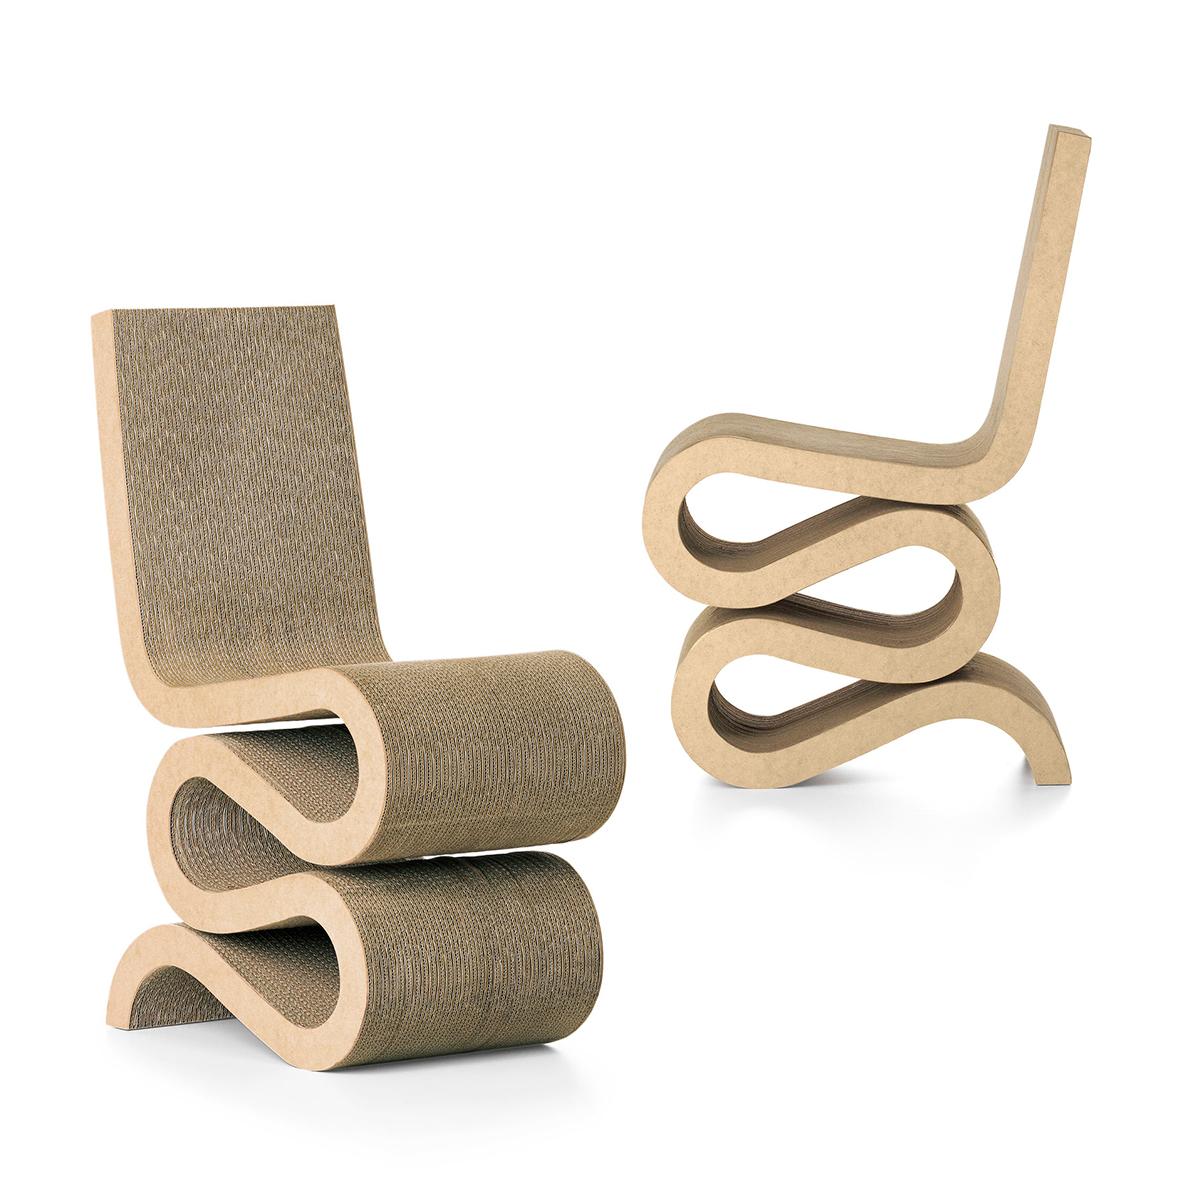 Chairdesigned by Frank Gehry in 1972.
Manufactured by Vitra, Switzerland.

The Wiggle side chair is part of Frank Gehry's 1972 furniture series 'Easy Edges', in which he succeeded in bringing a new aesthetic dimension to such an everyday material